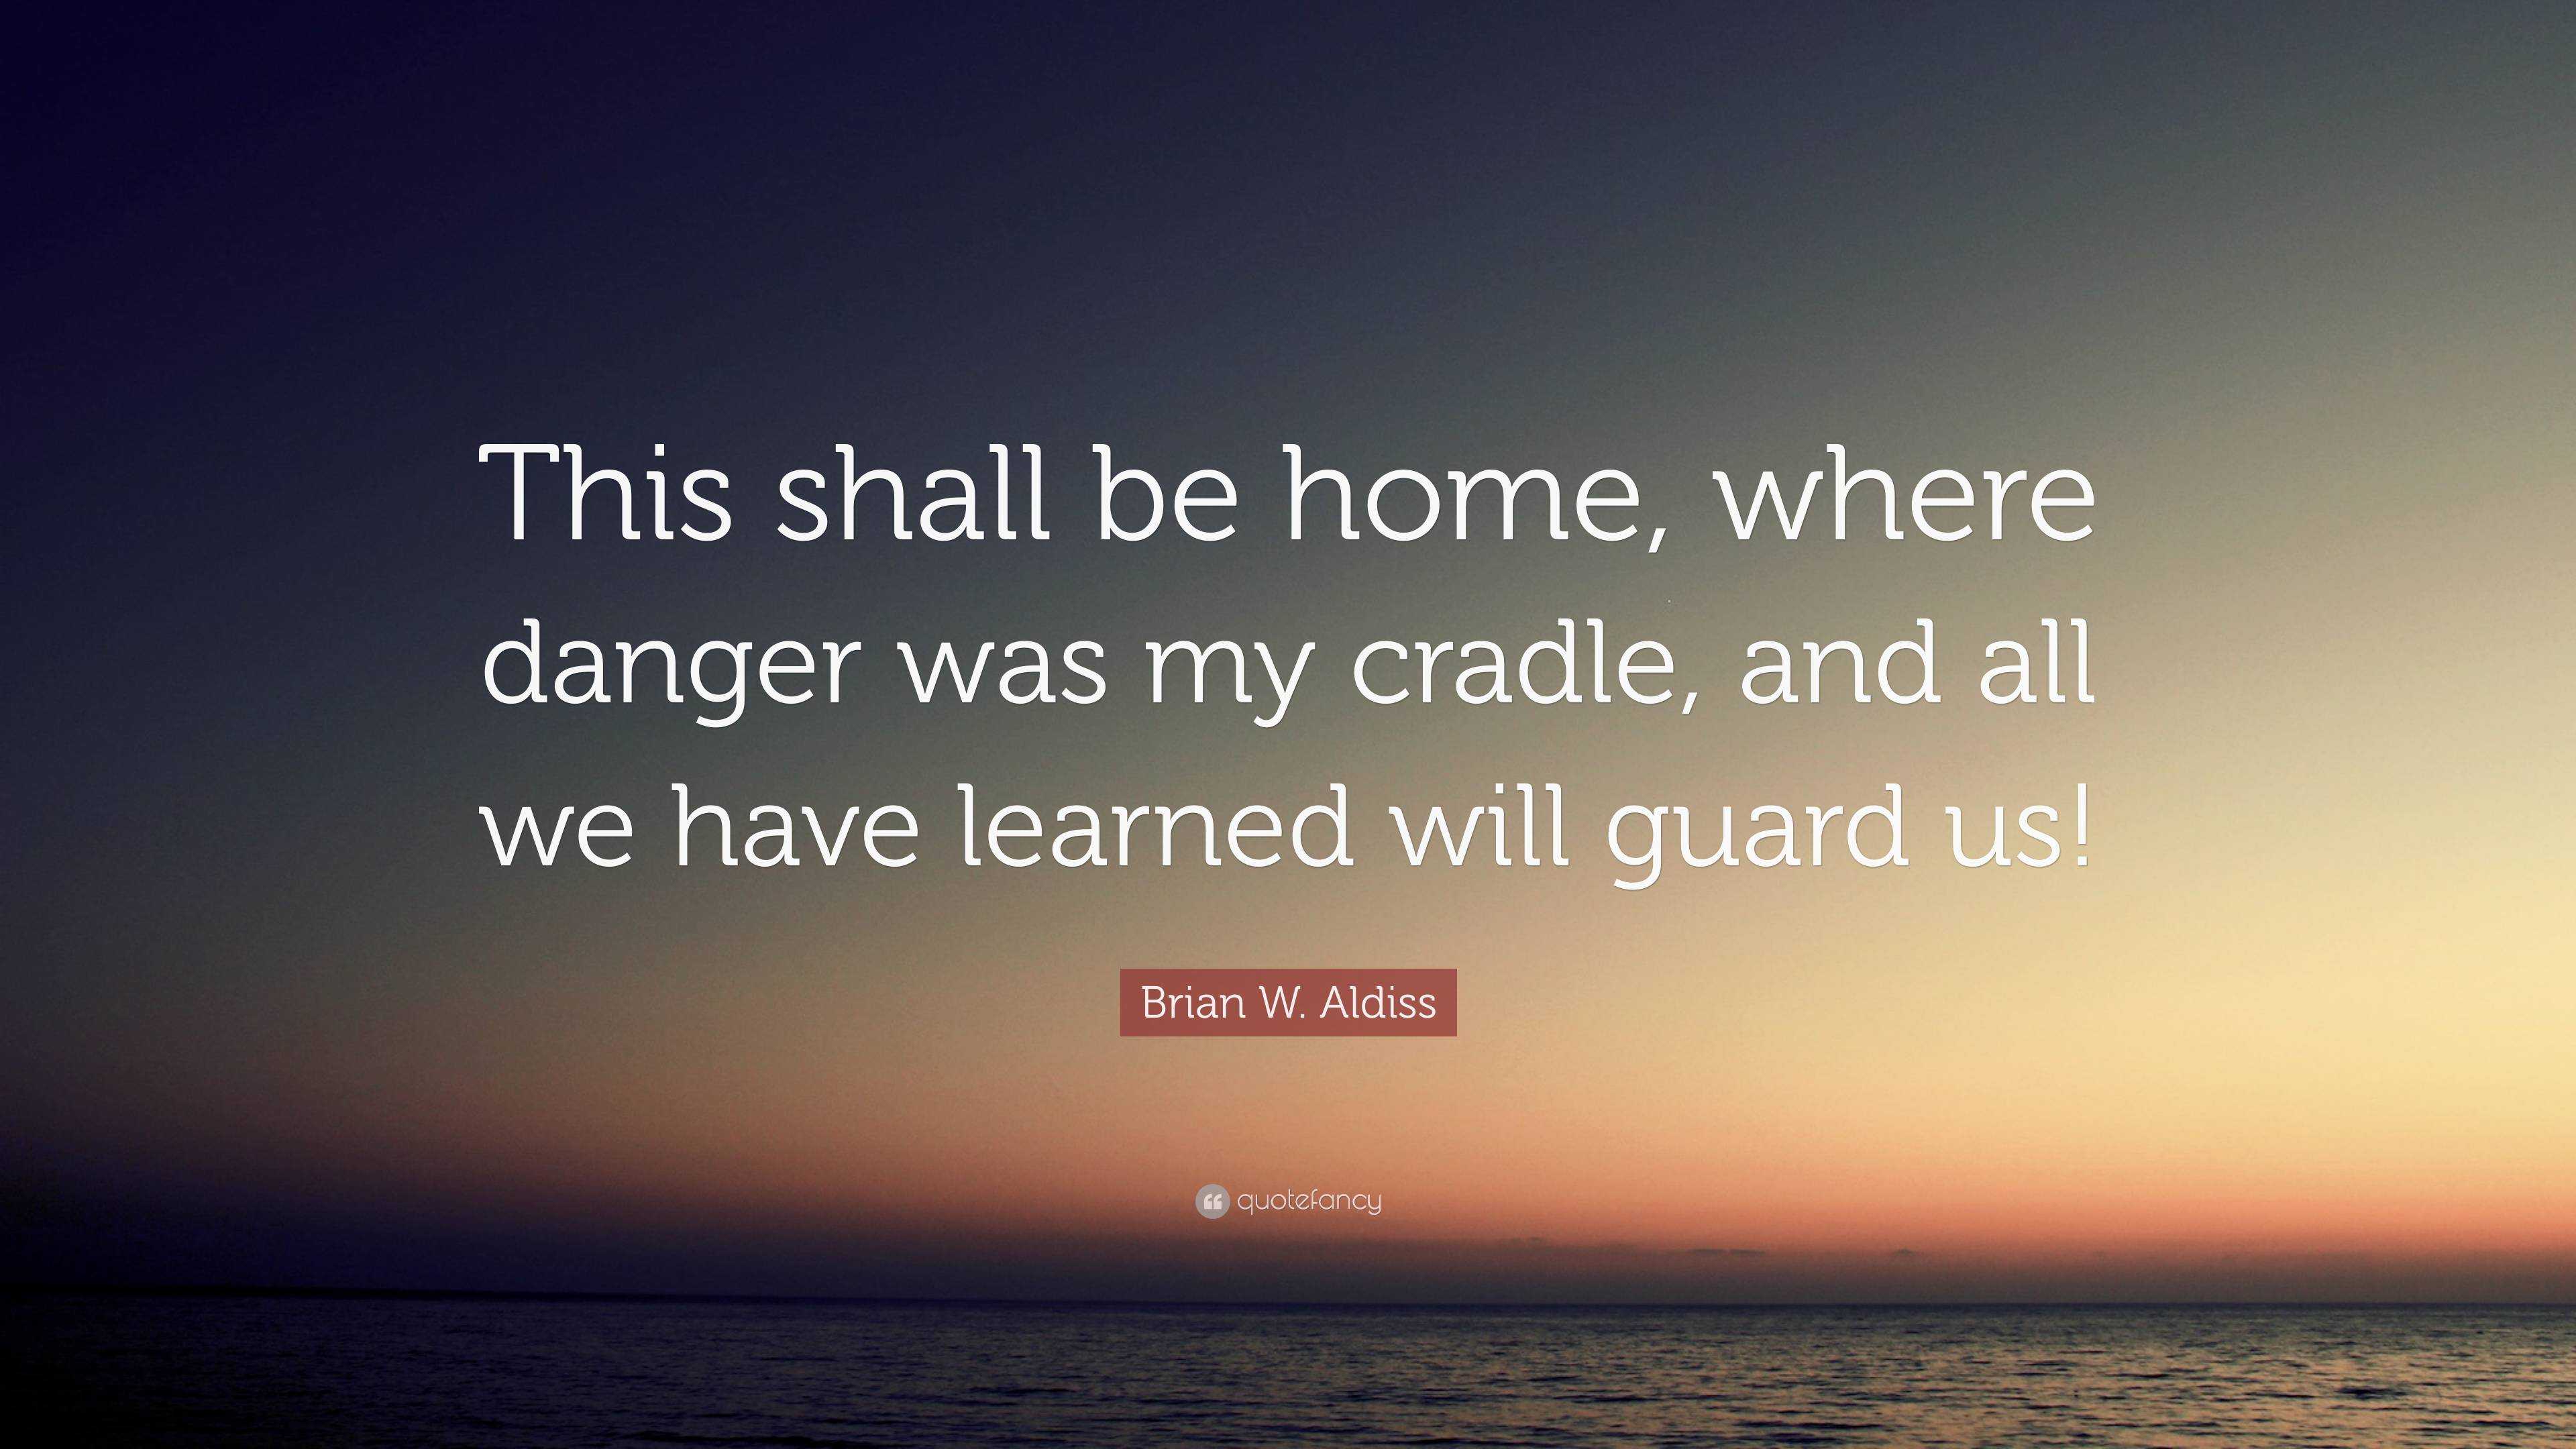 Brian W. Aldiss Quote: “This shall be home, where danger was my